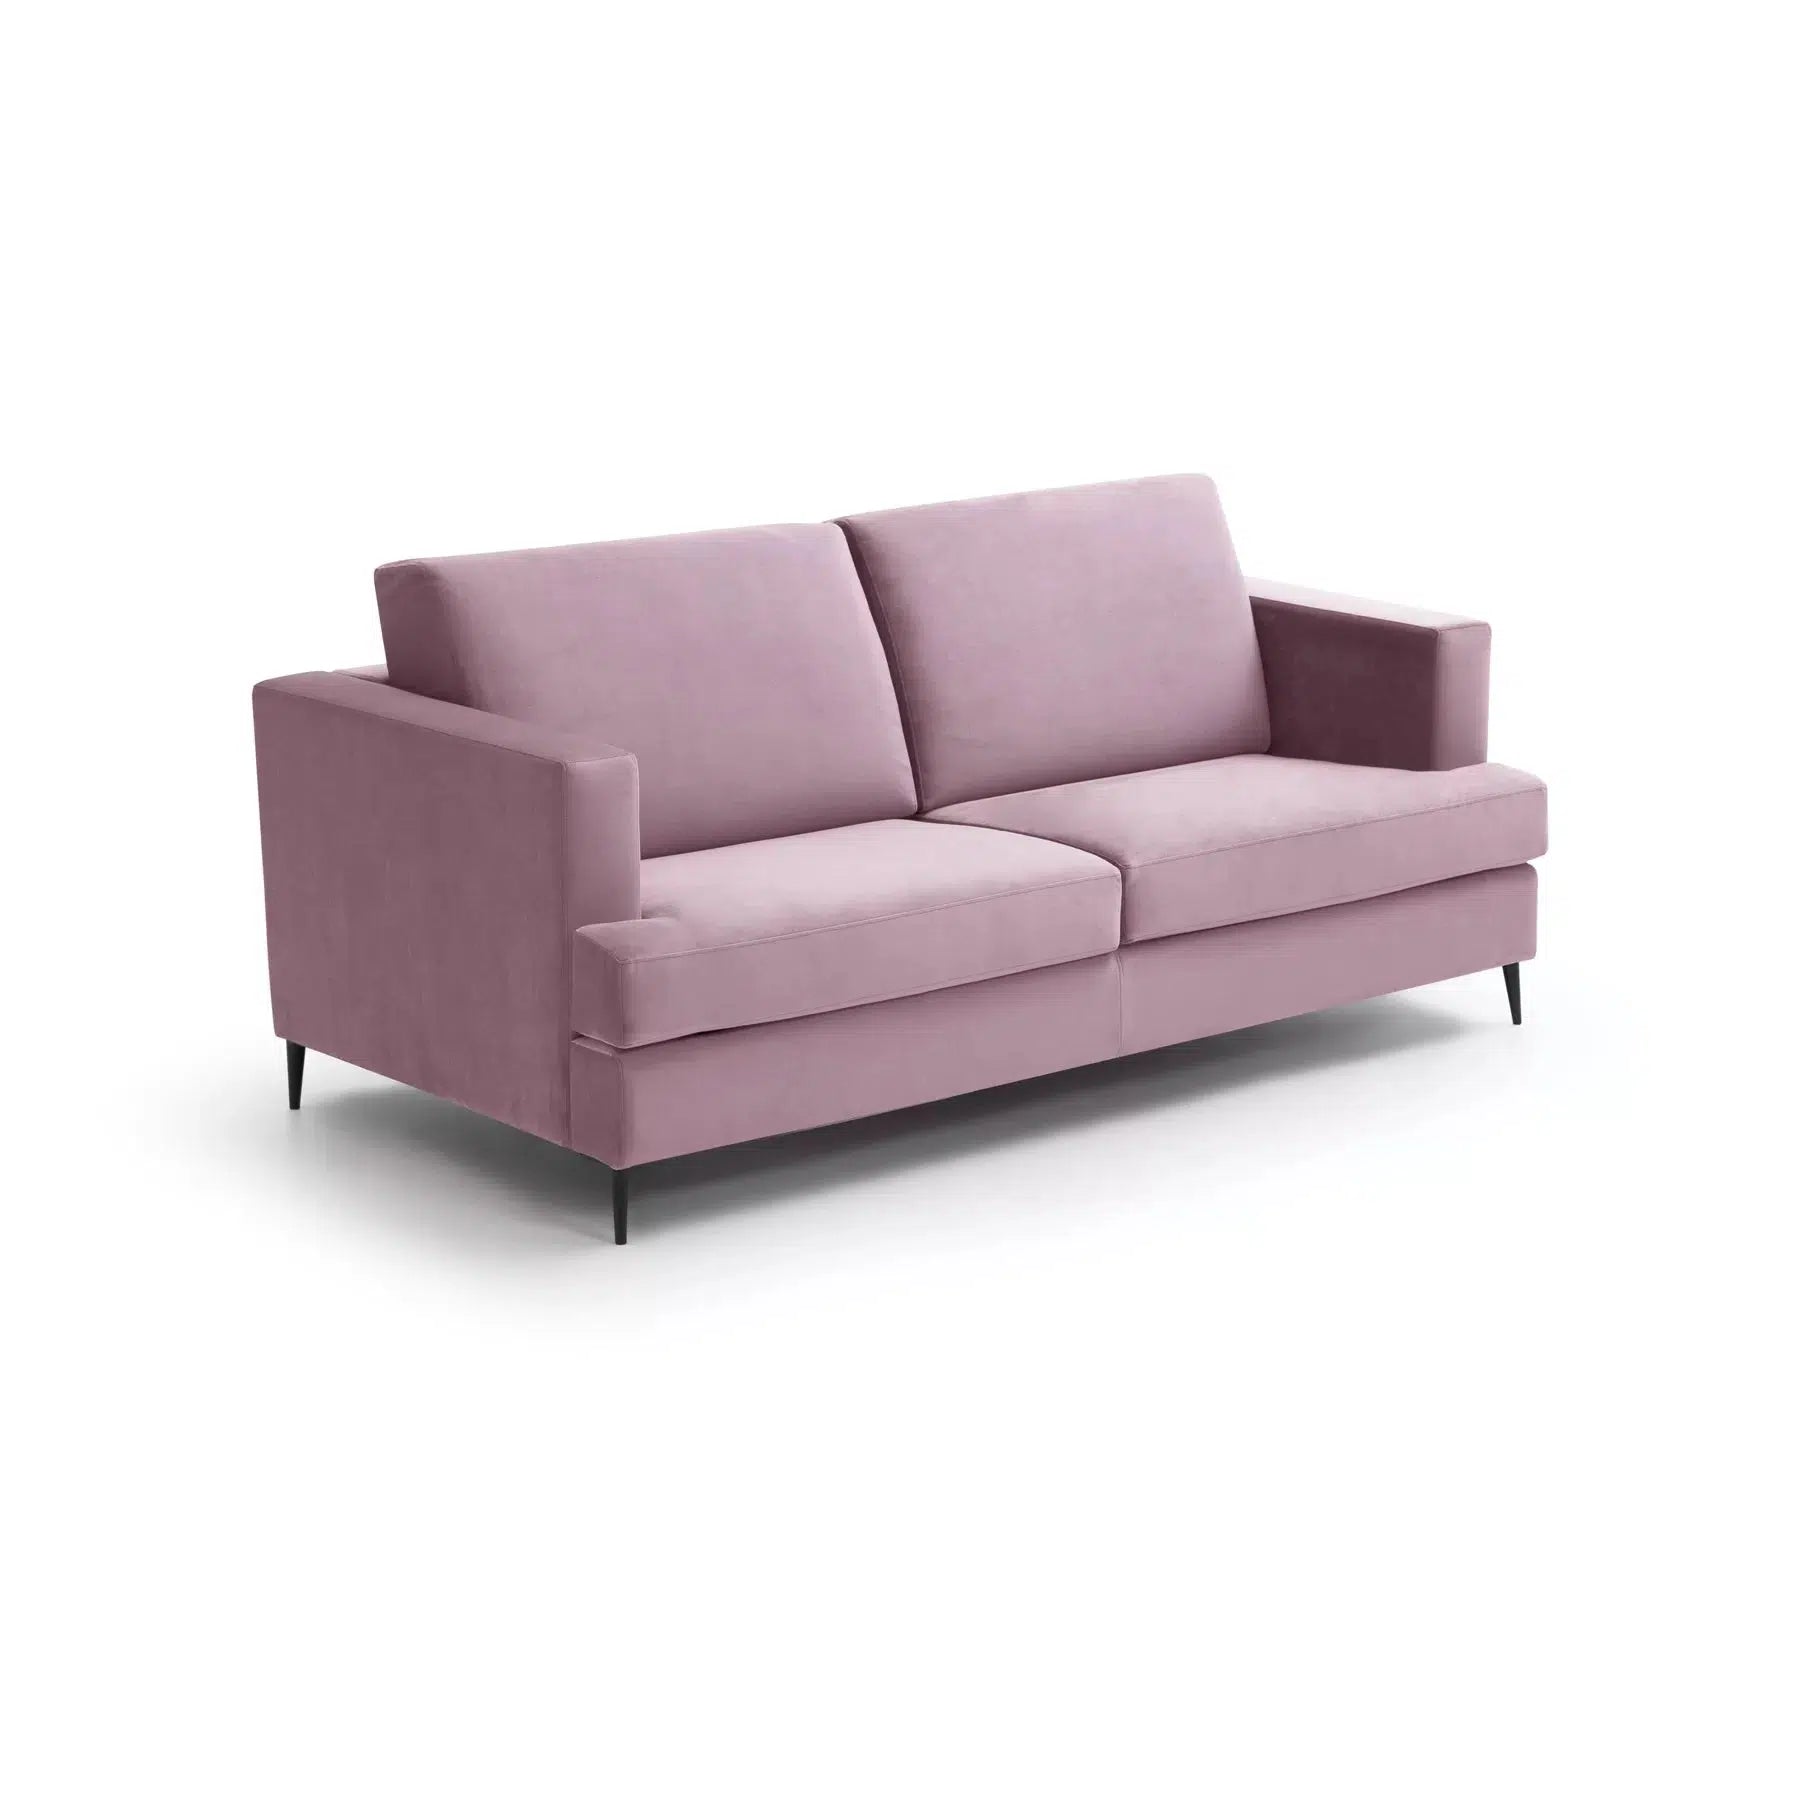 Jann 949 Sofa Bed-TM Leader-Contract Furniture Store